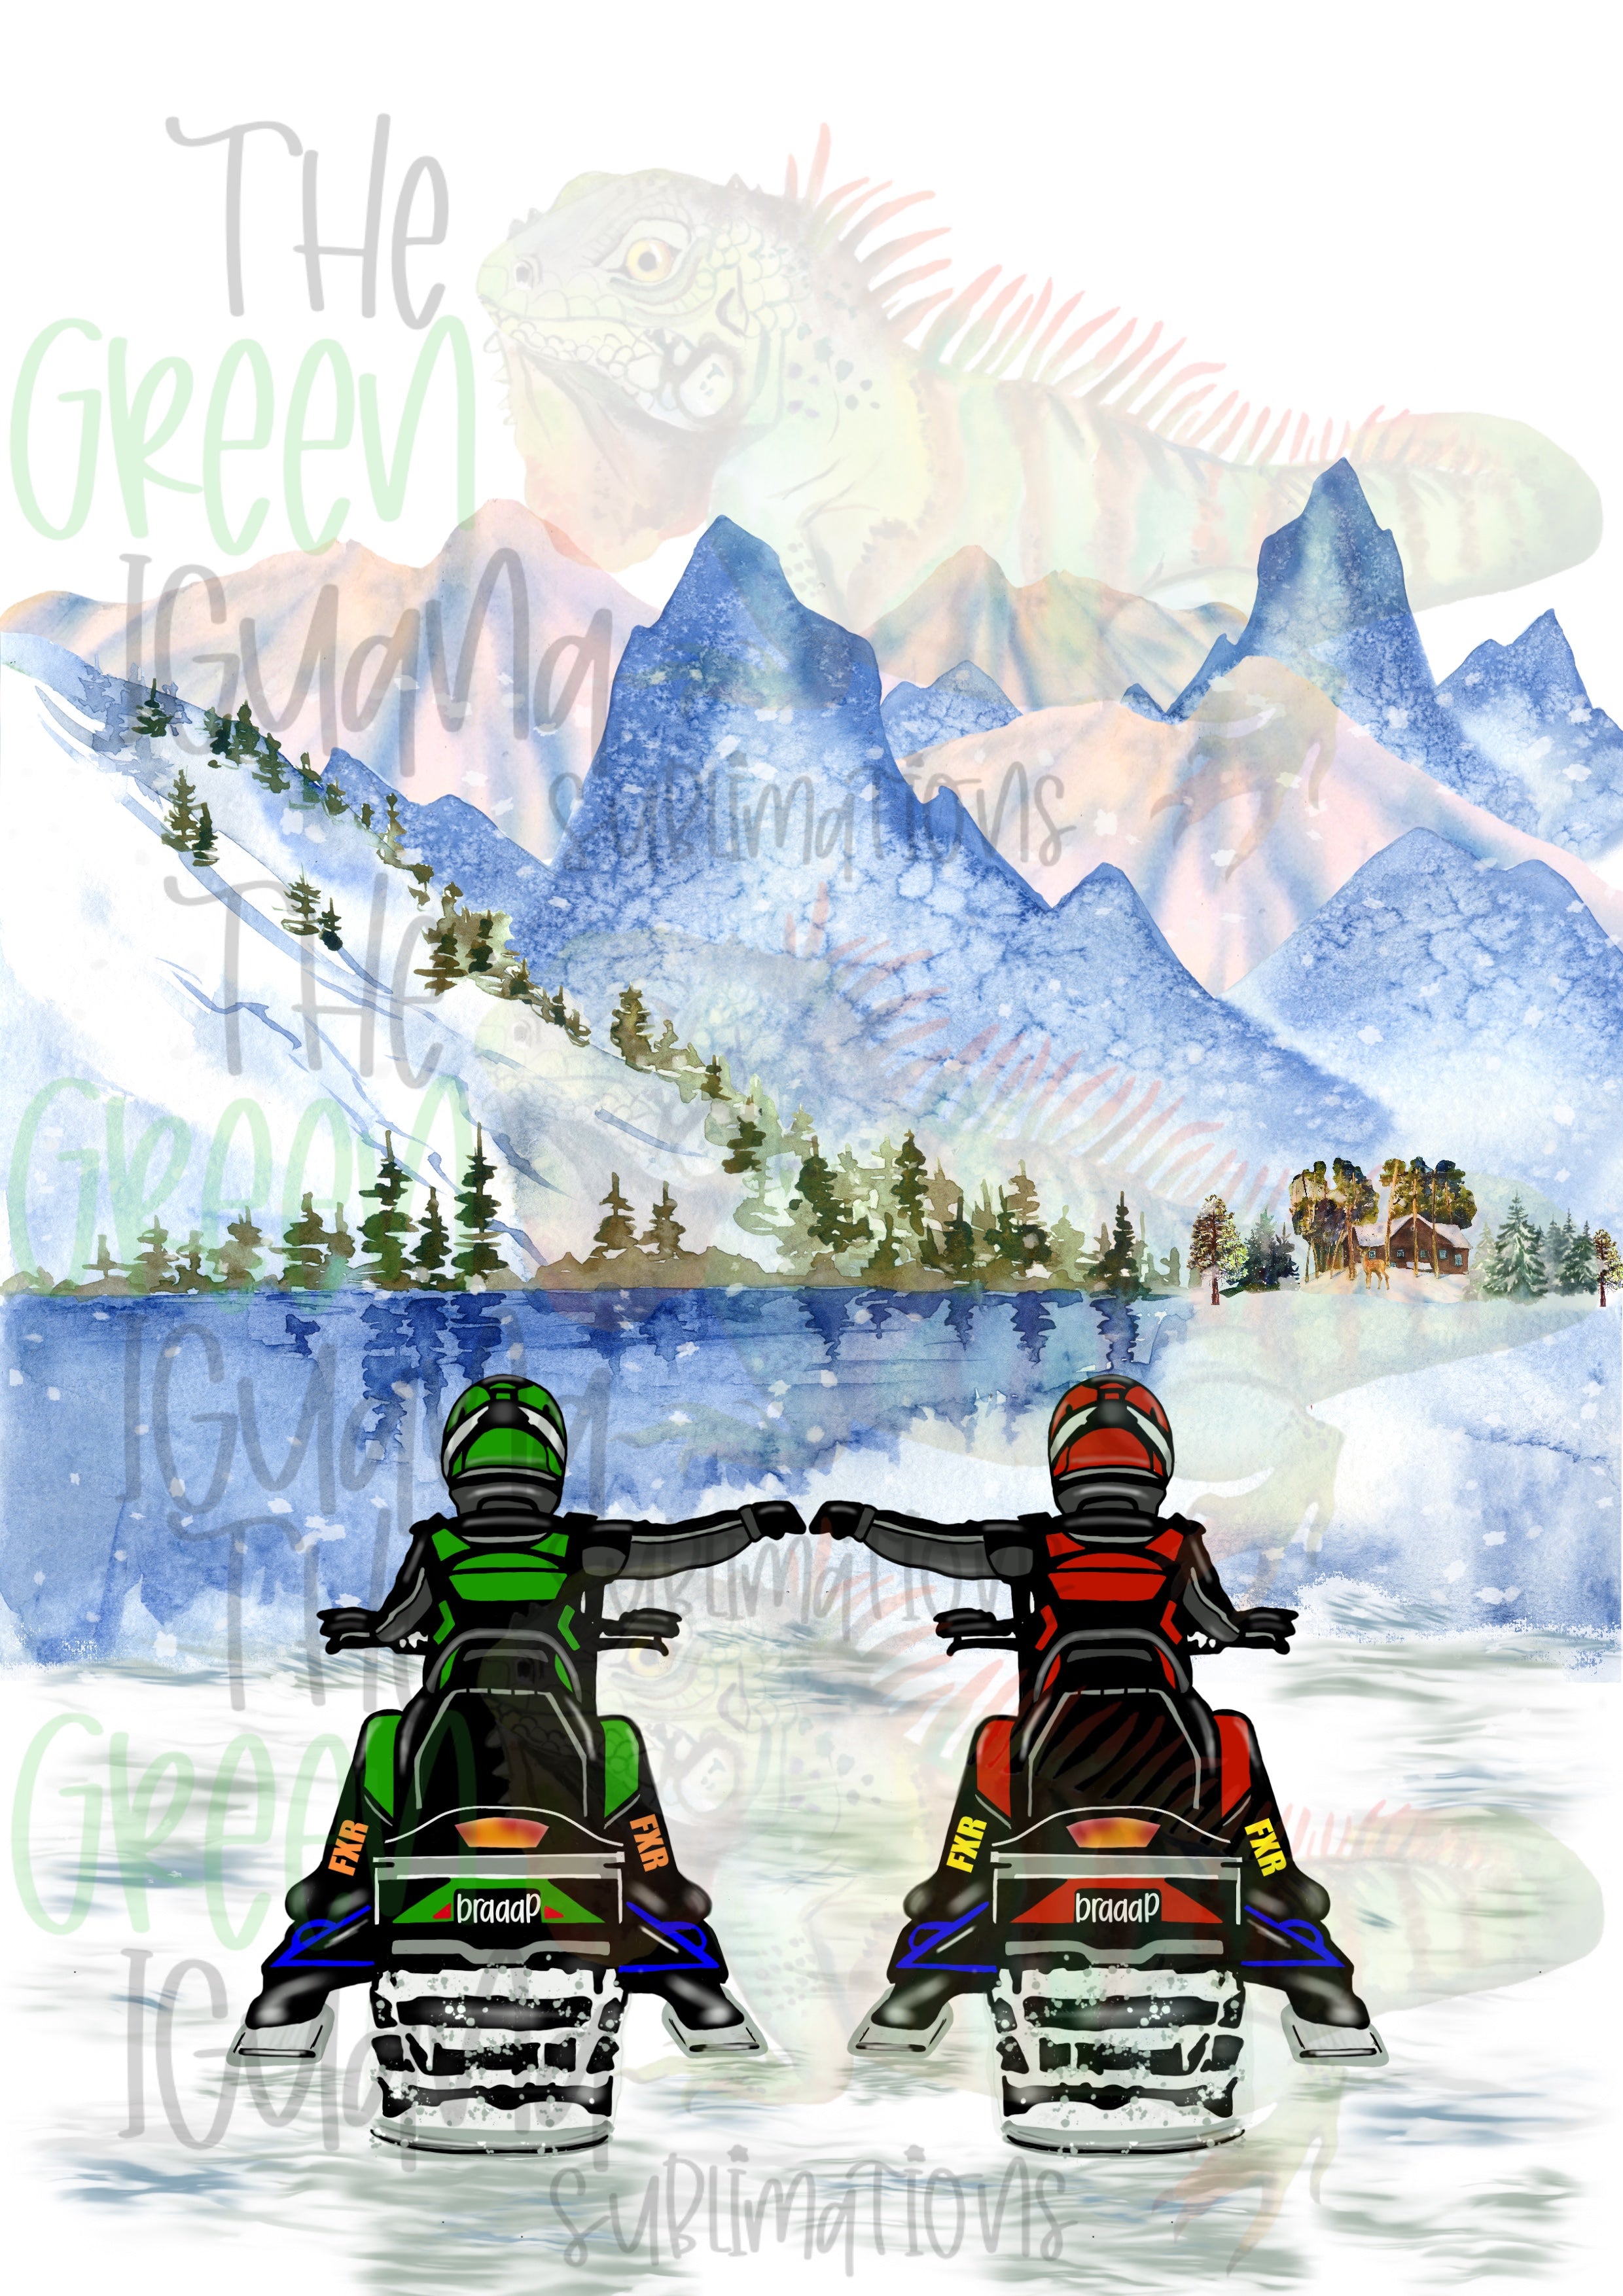 Snowmobile couple/friends - lime green & red